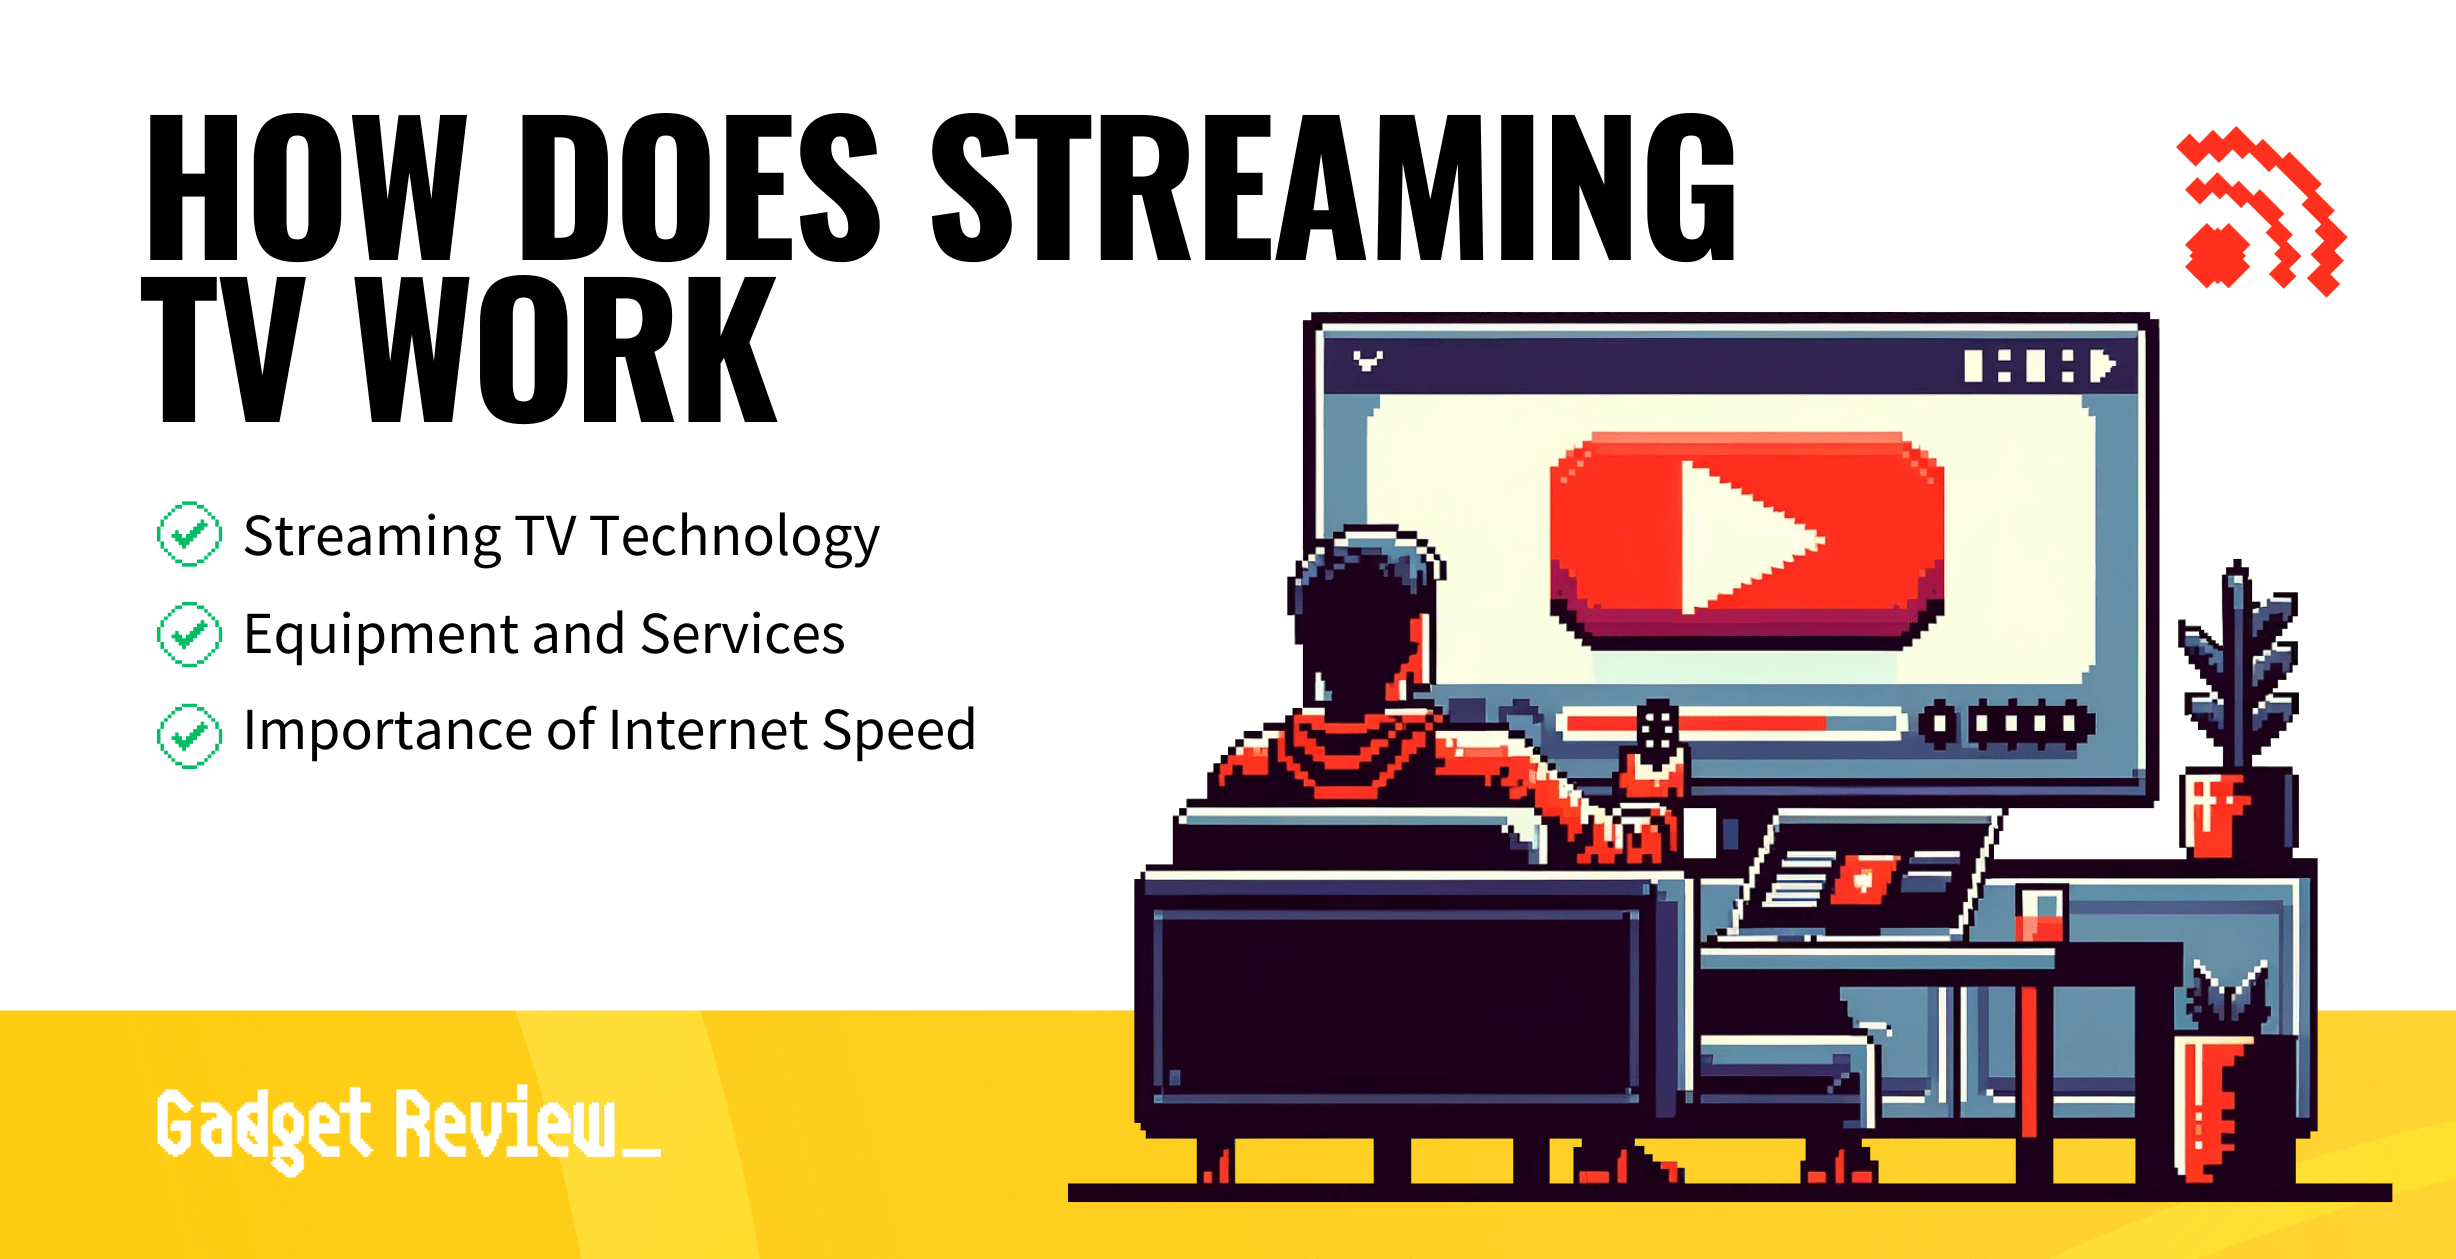 How Does Streaming TV Work?